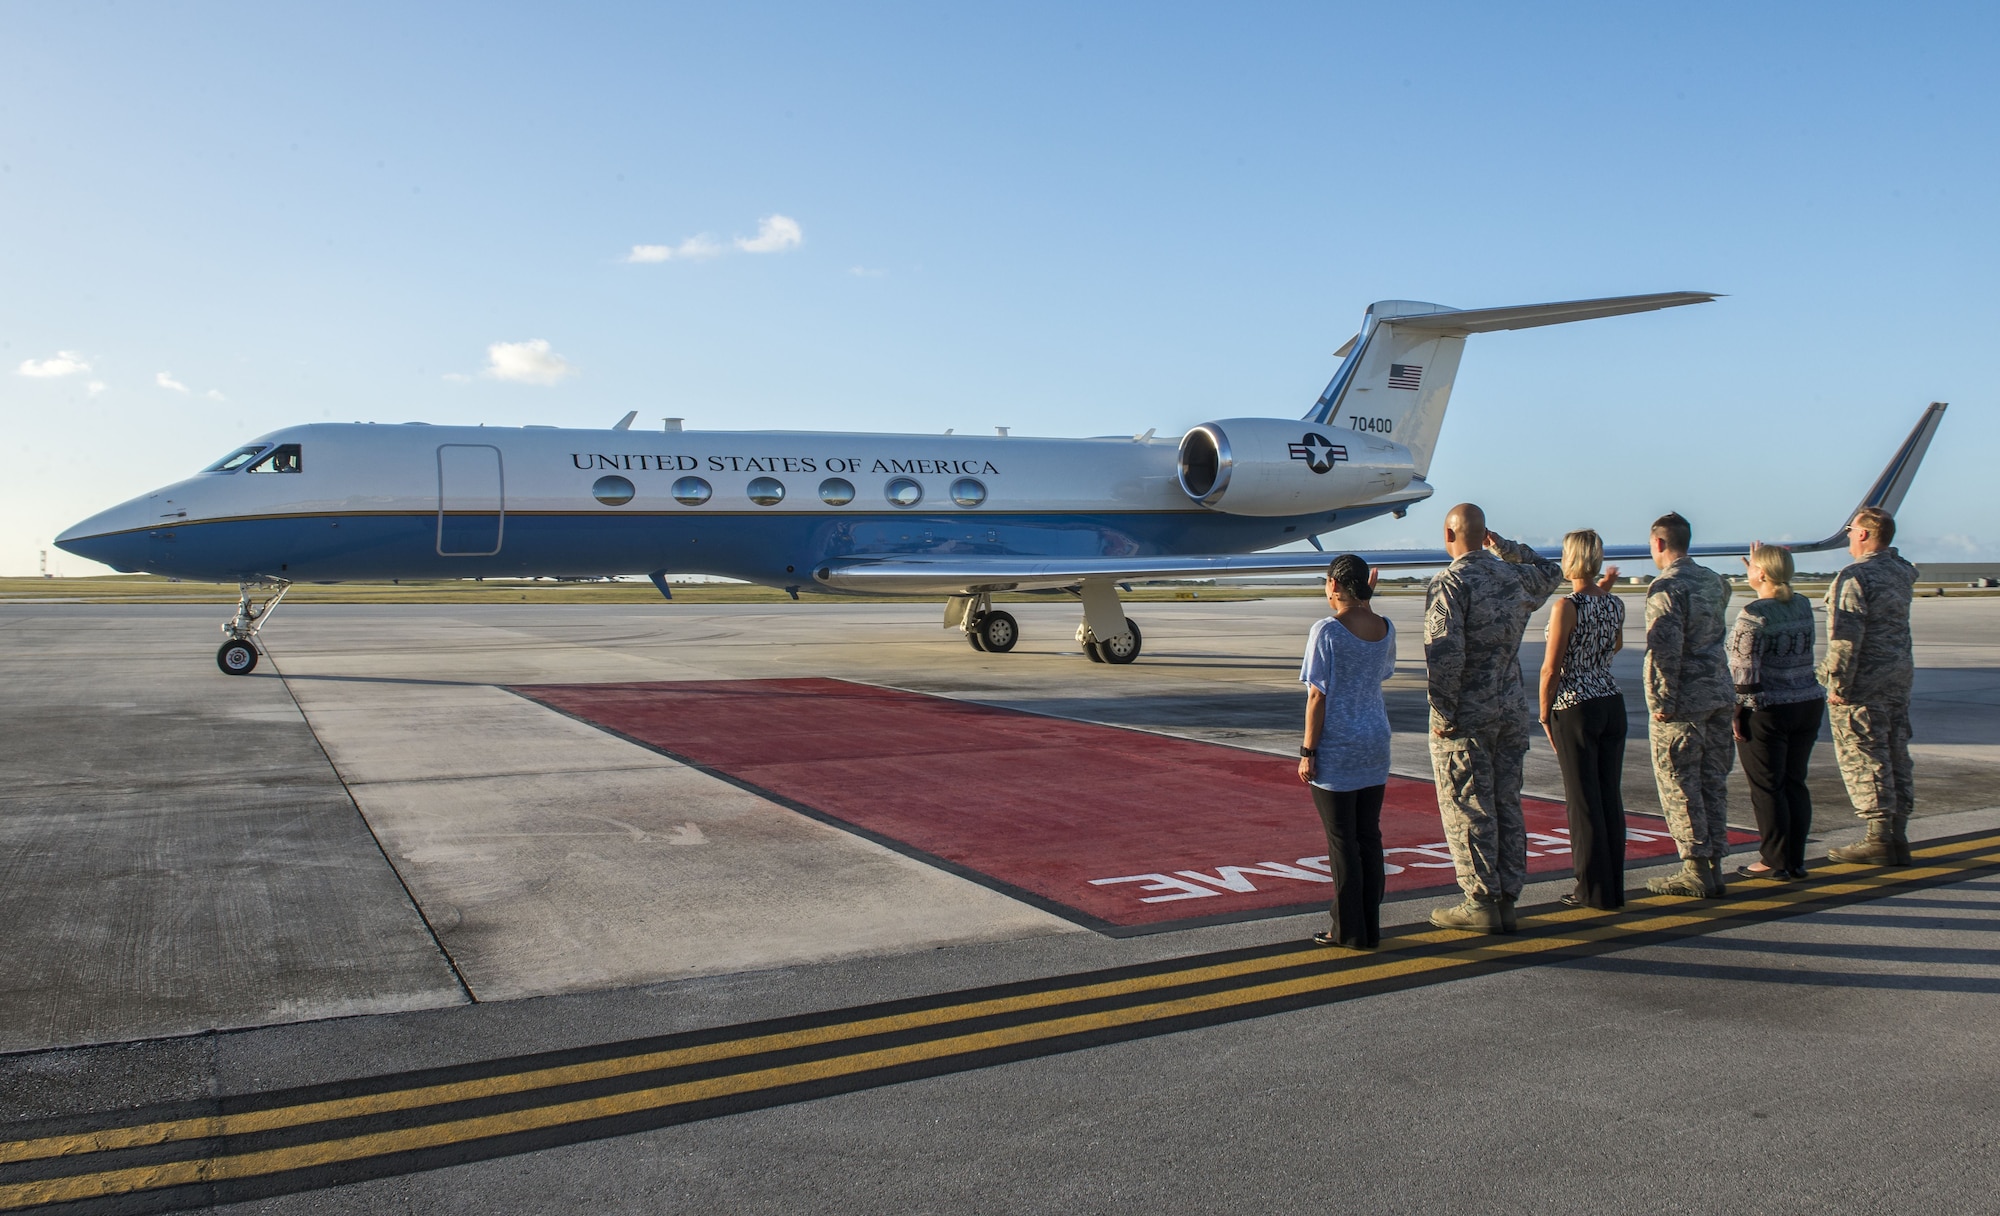 Secretary of the Air Force Heather Wilson departs Andersen Air Force Base, Guam, Jan. 25, 2018. This visit marks the first time she has been to Andersen AFB. (U.S. Air Force photo by Airman 1st Class Christopher Quail)